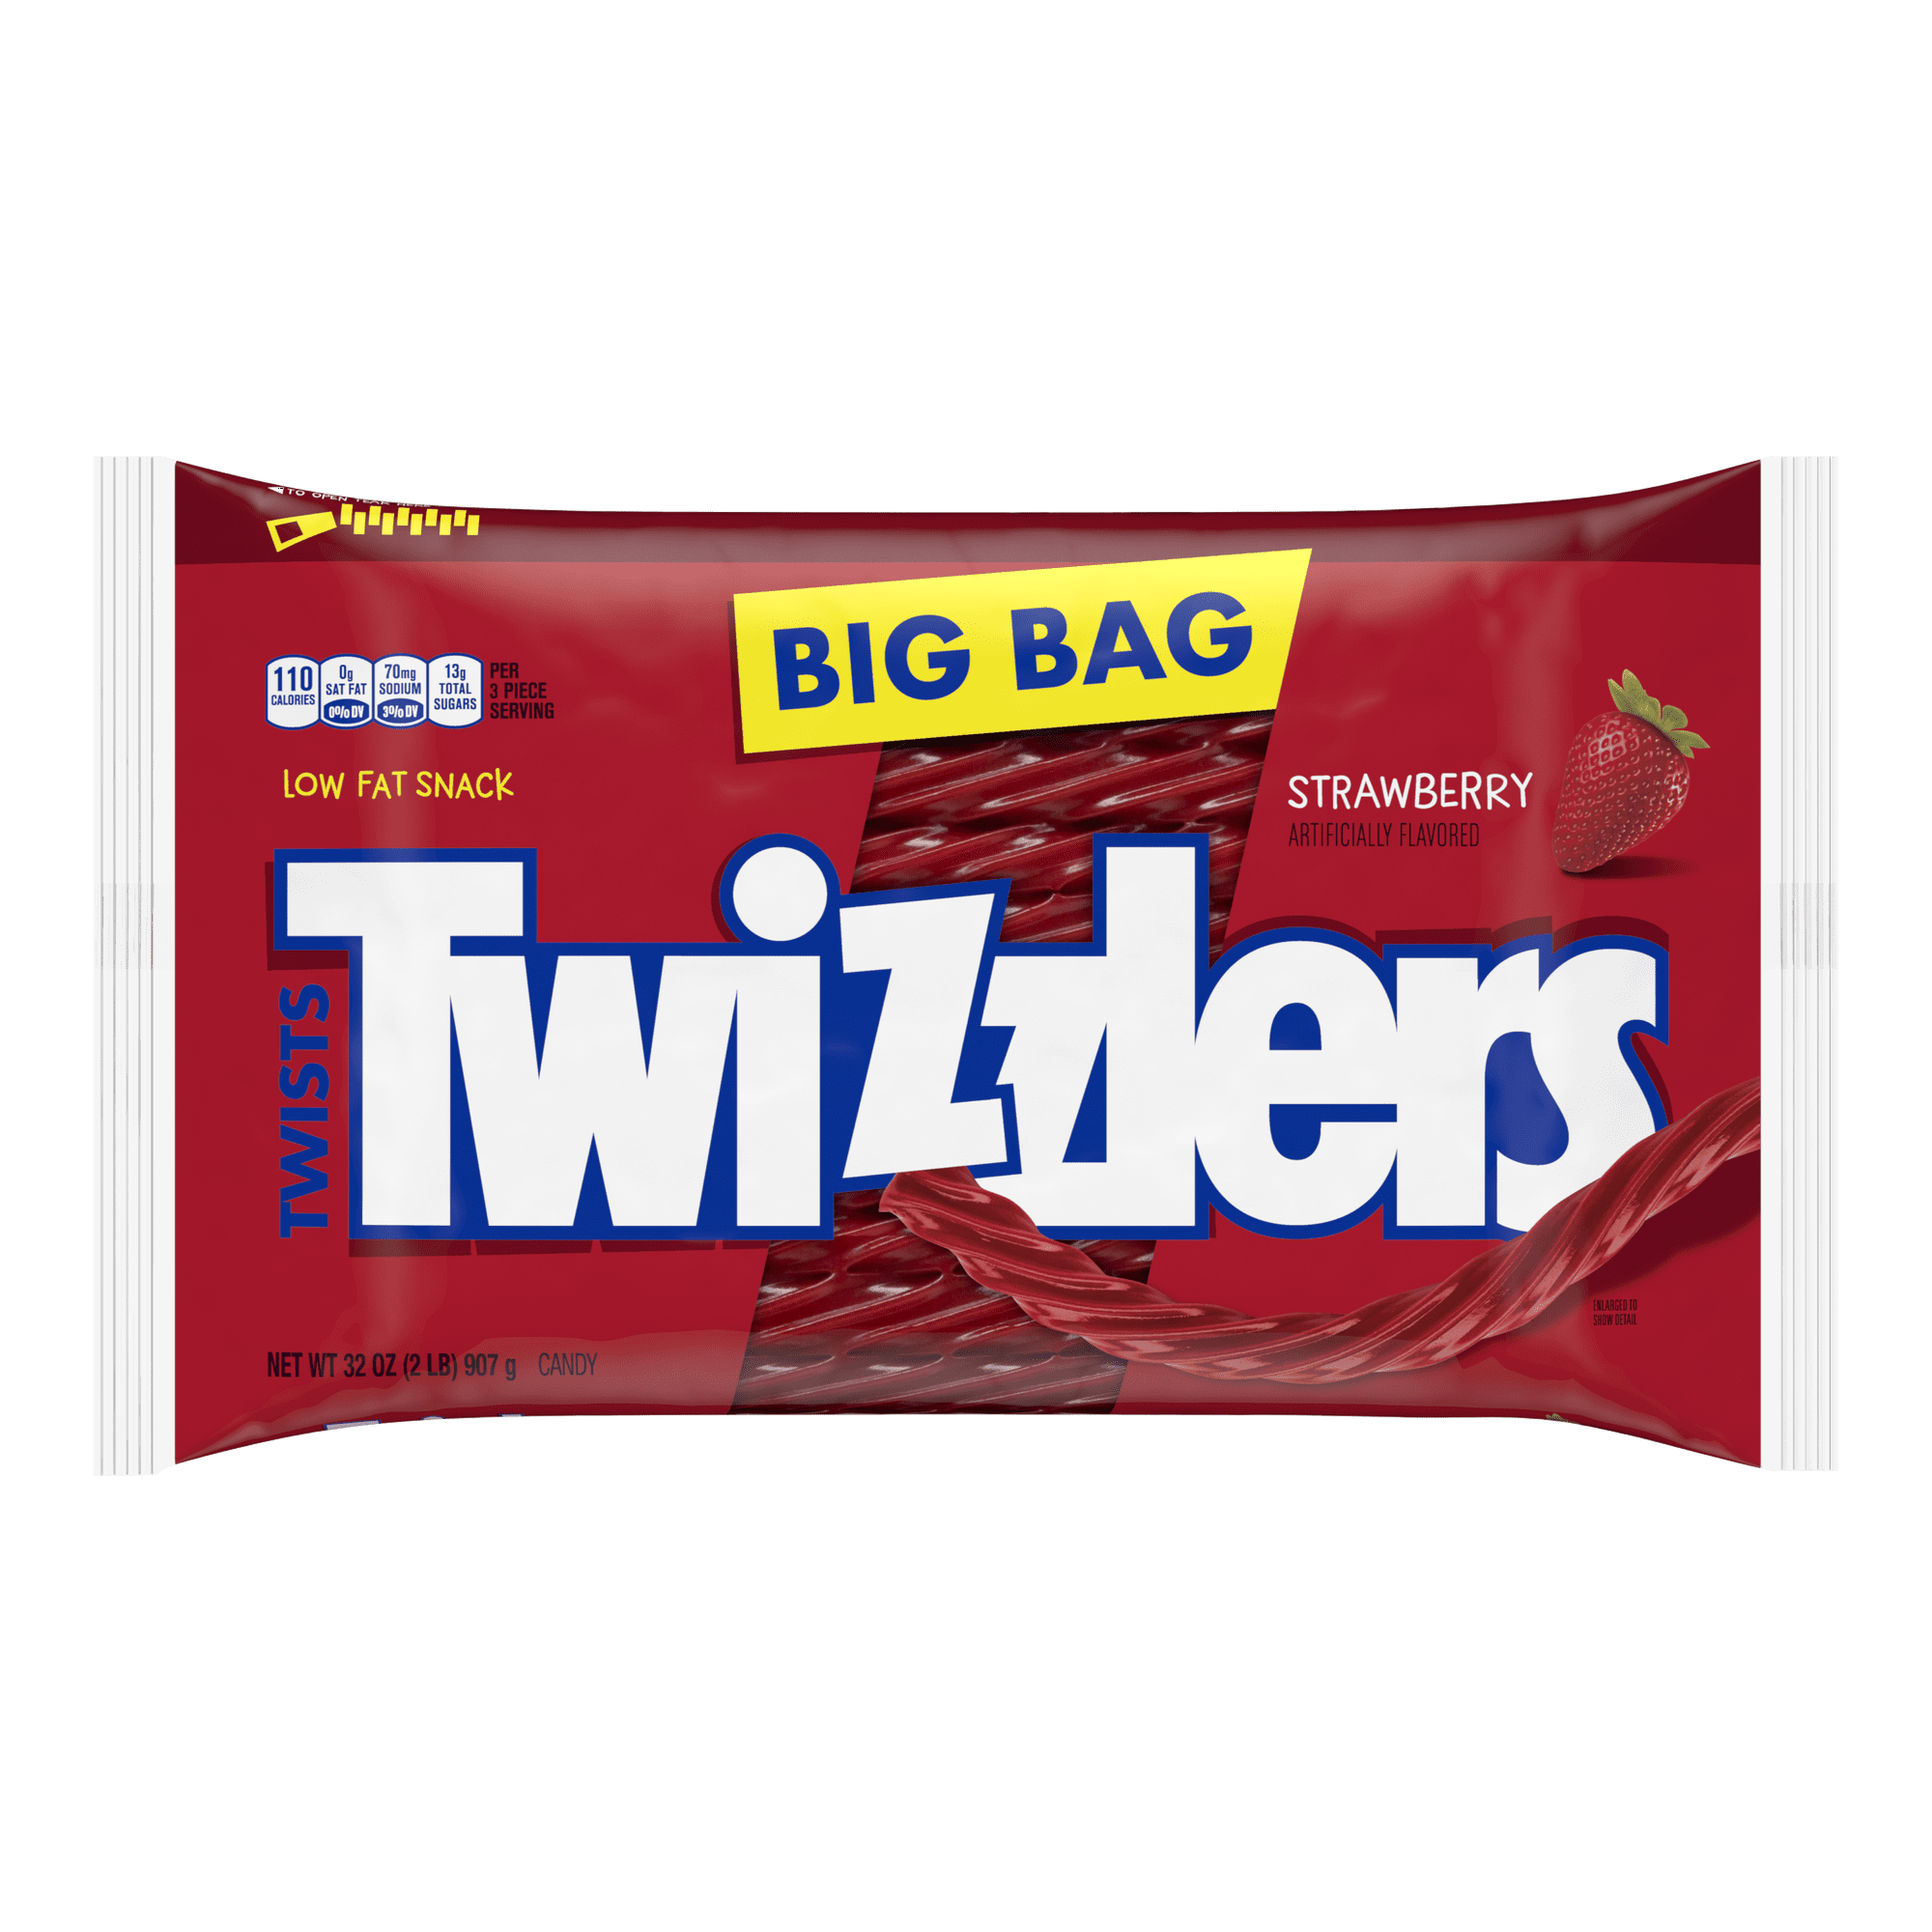 Twizzlers-Twists-Strawberry-Chewy-Chewy-Candy-Big-Bag-32-oz_7e440d95-79a7-4dc0-a223-a815859a3e1d.e6f69c4527b6eef230198165dfd8f9b2.png